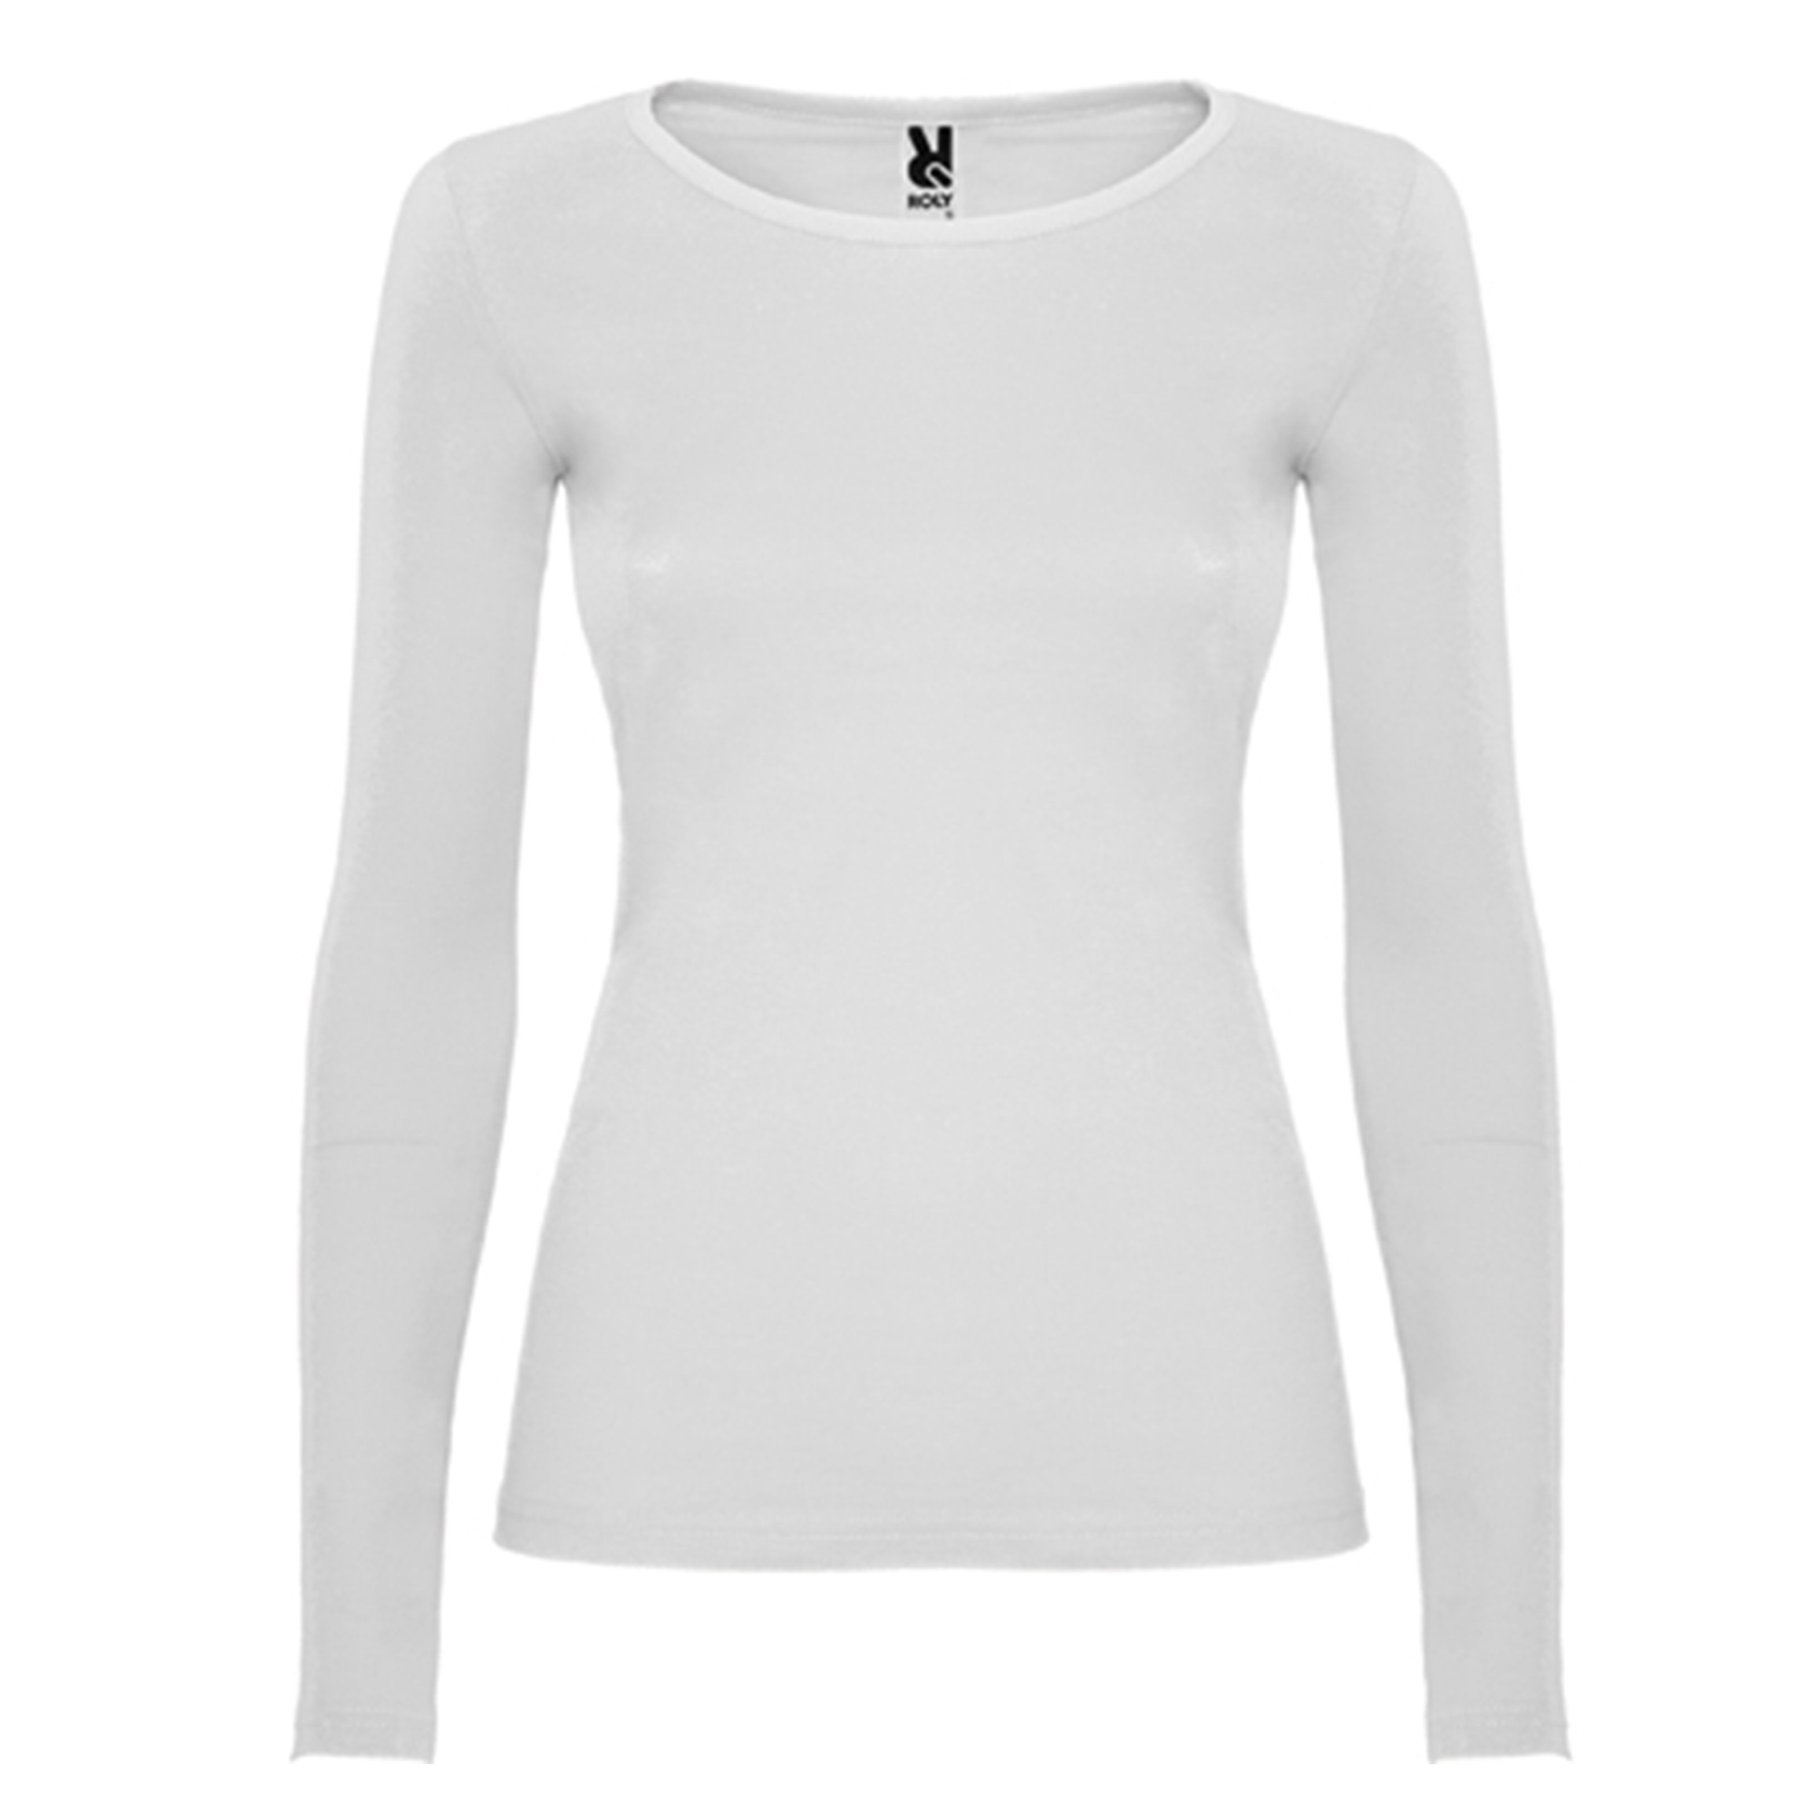 Extreme Woman long sleeve t-shirt with your LOGO